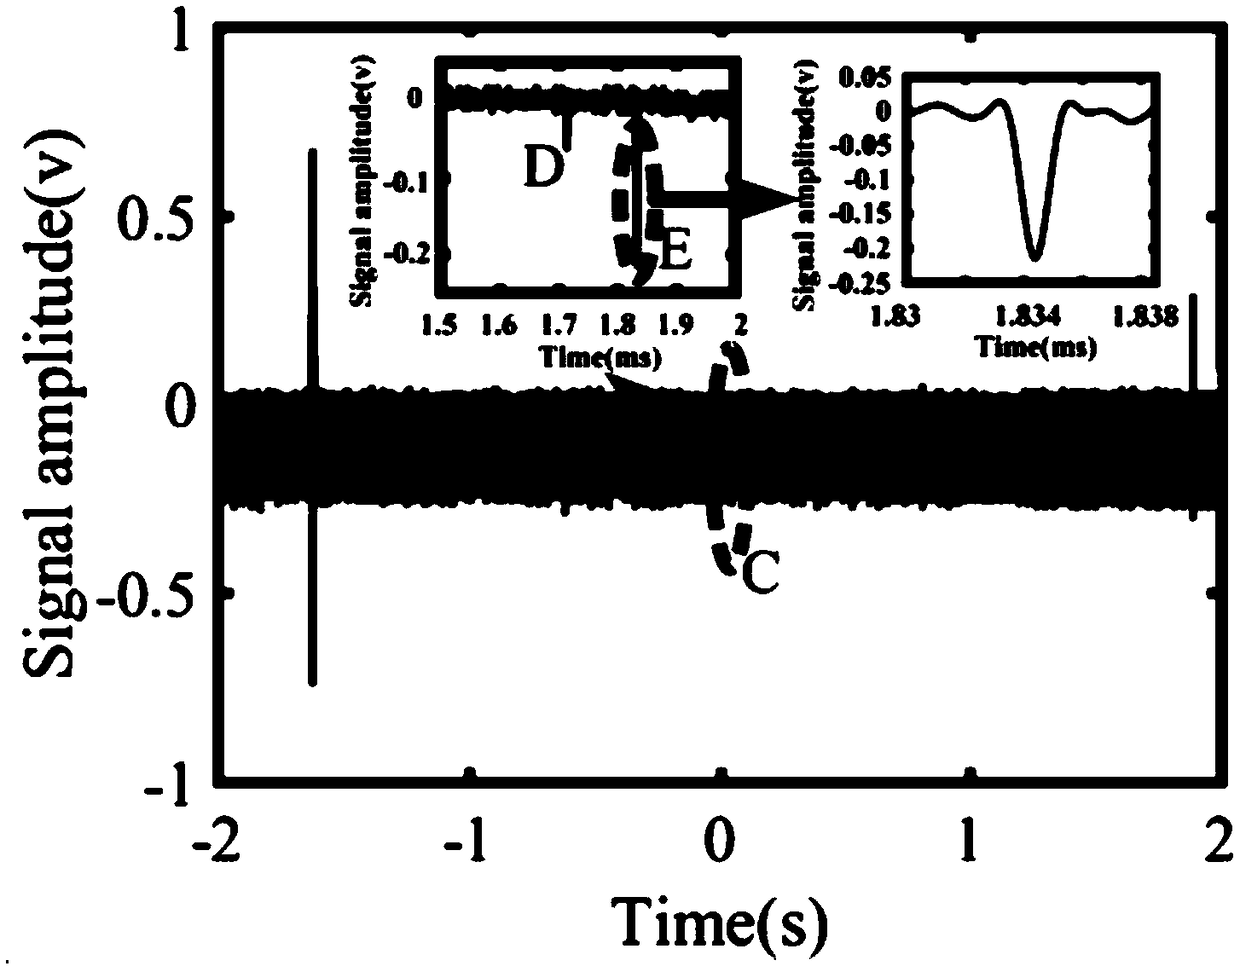 High-precision seawater sound velocity measuring method based on optical frequency comb interference